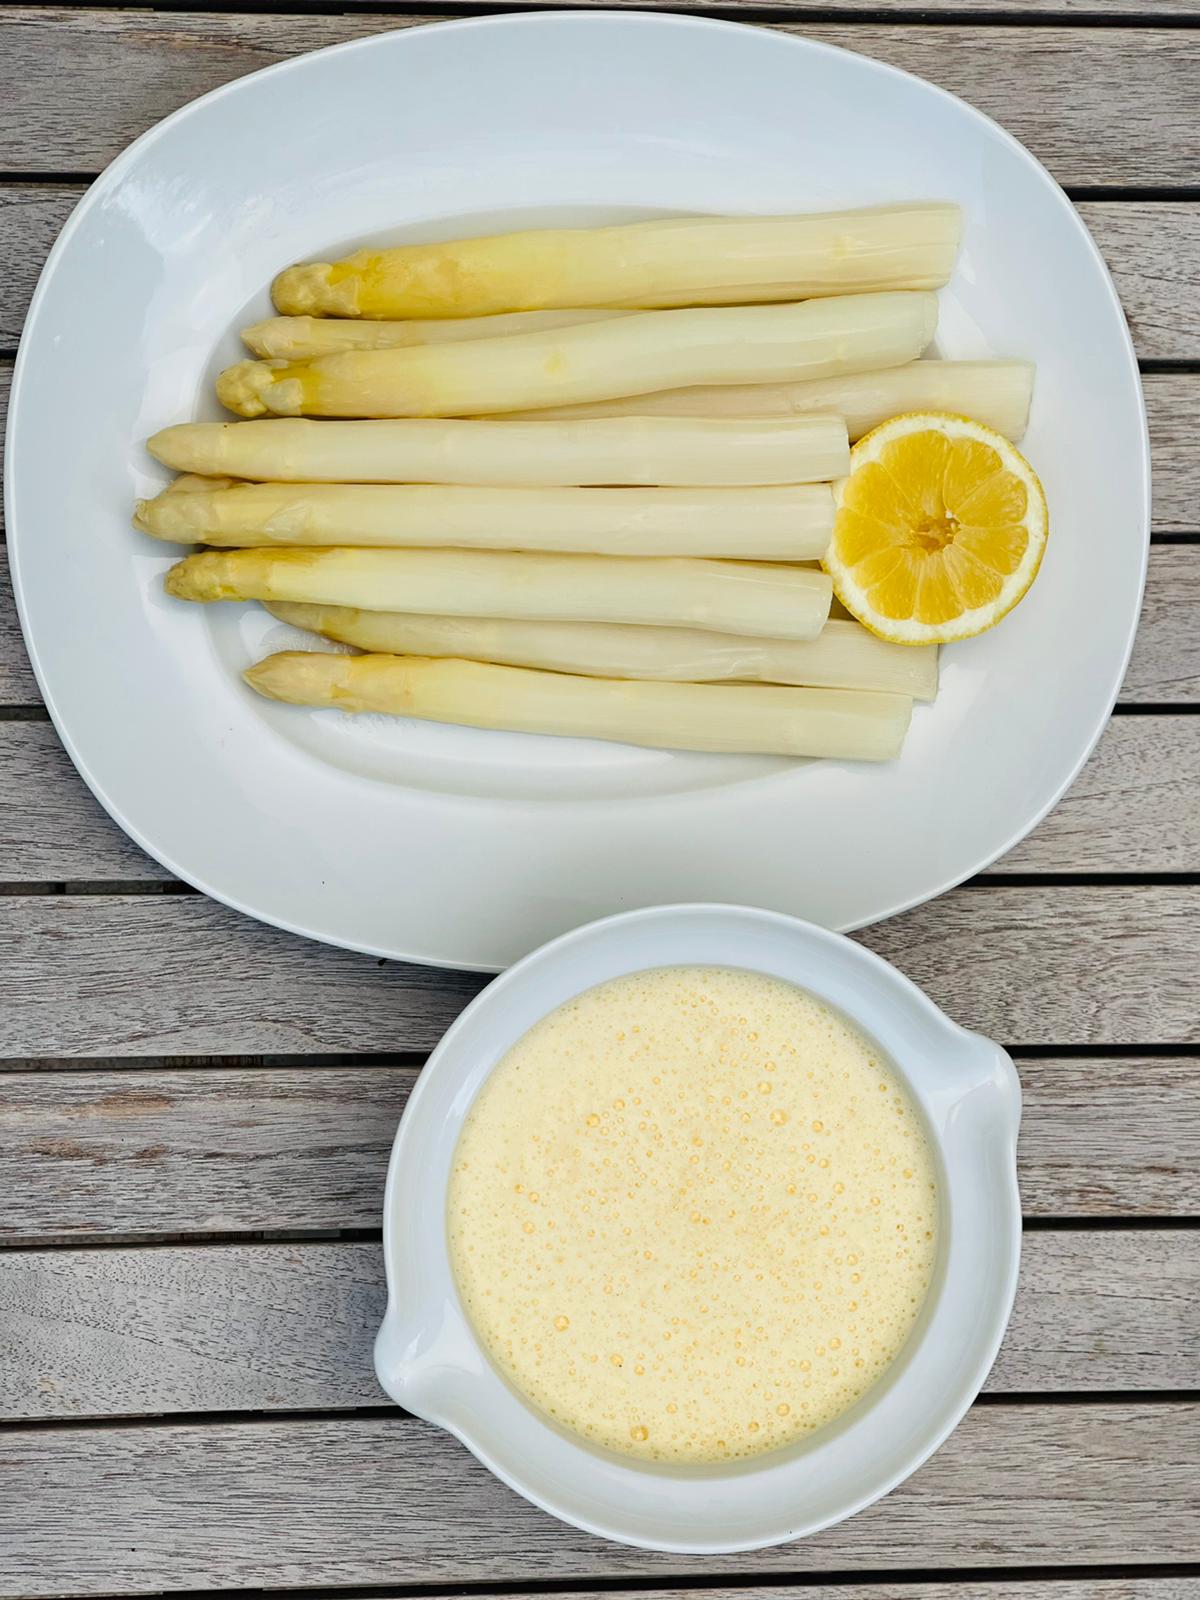 Low-Carb Spargel mit selbst gemachter Sauce Hollandaise - KICK ARSE